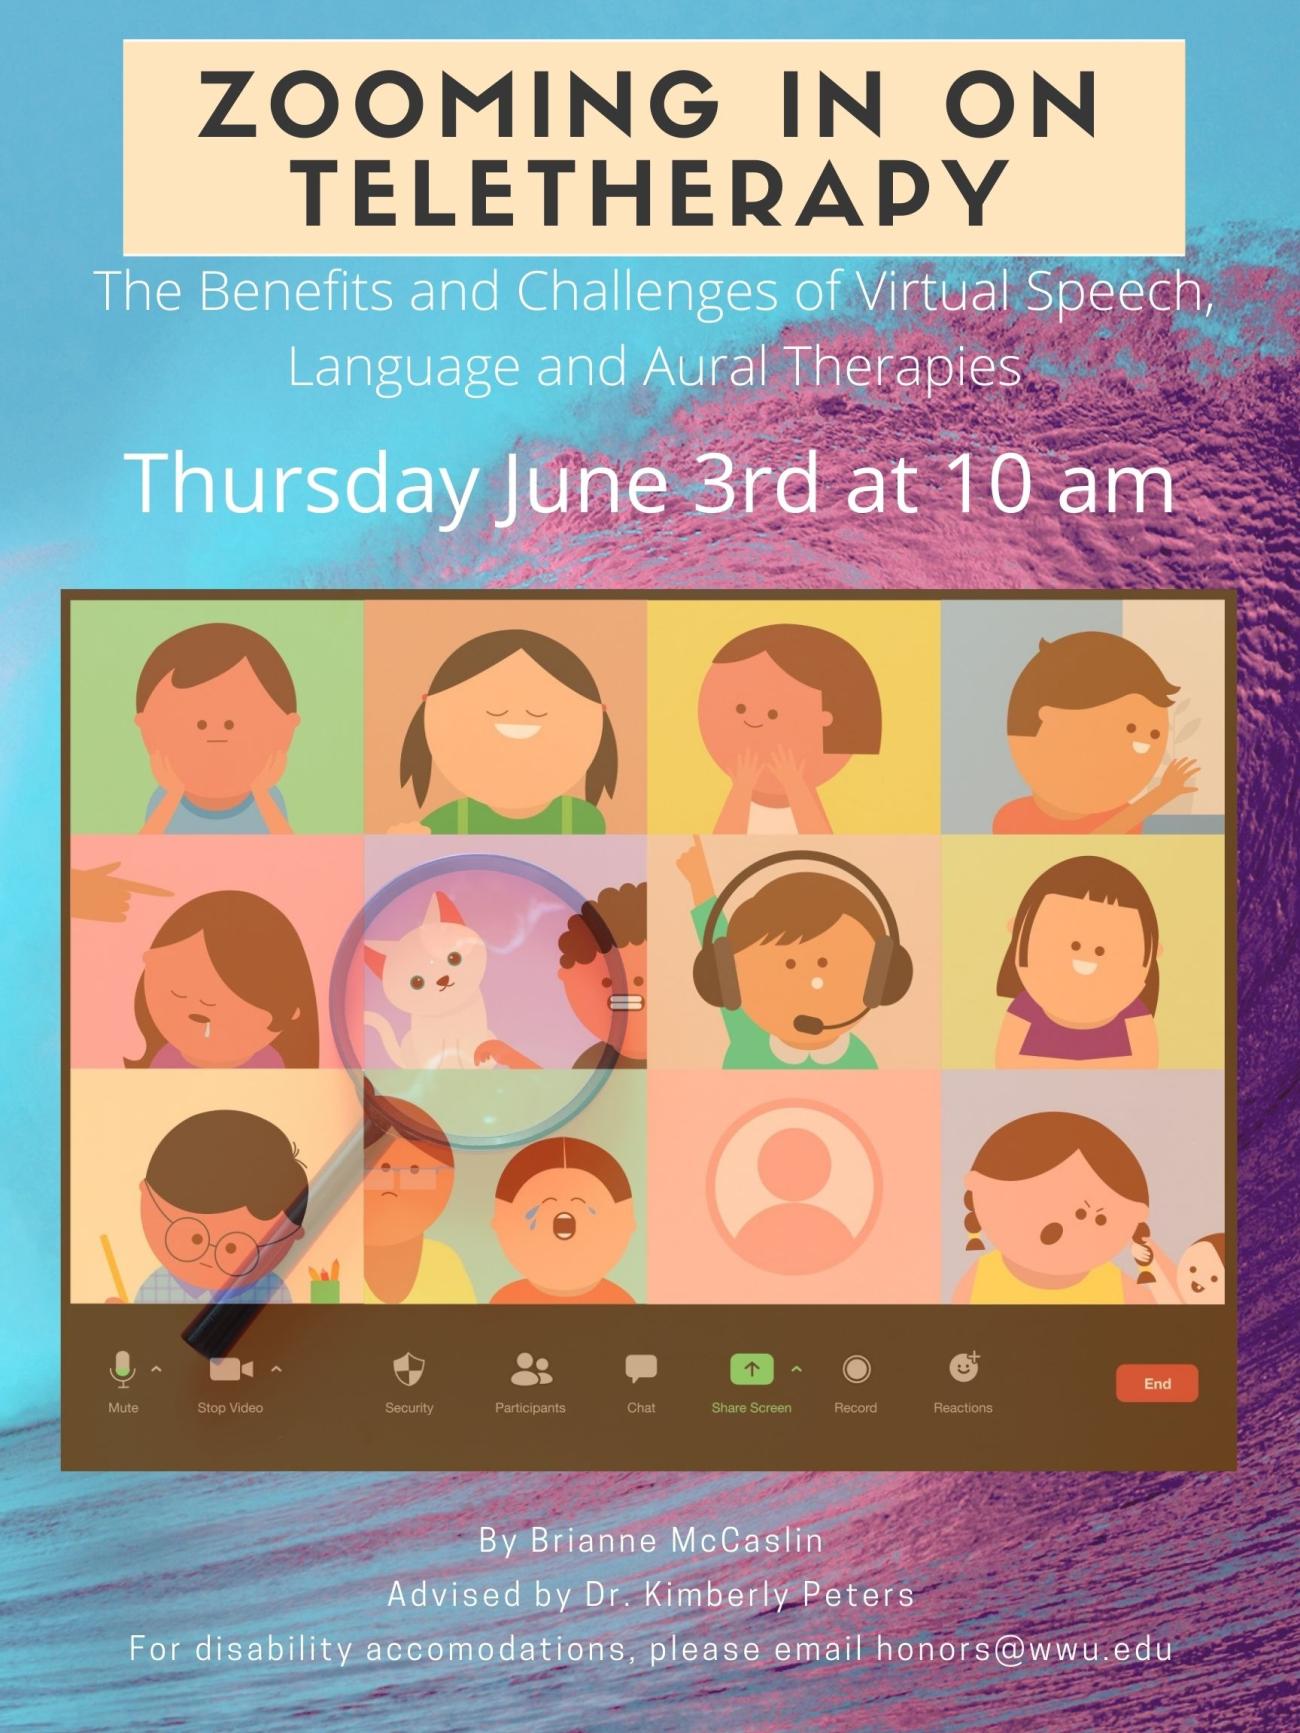  A cartoon drawing of a Zoom call with 12 different people in squares. A magnifying glass examines one square. The background is a pink and blue photo of an ocean wave. Text reads: "Zooming in on Teletherapy: The Benefits and Challenges of Virtual Speech, Language, and Aural Therapies. Thursday June 3rd at 10am. By Brianne McCaslin, advised by Dr. Kimberly Peters. For disability accommodations, please email honors@wwu.edu".